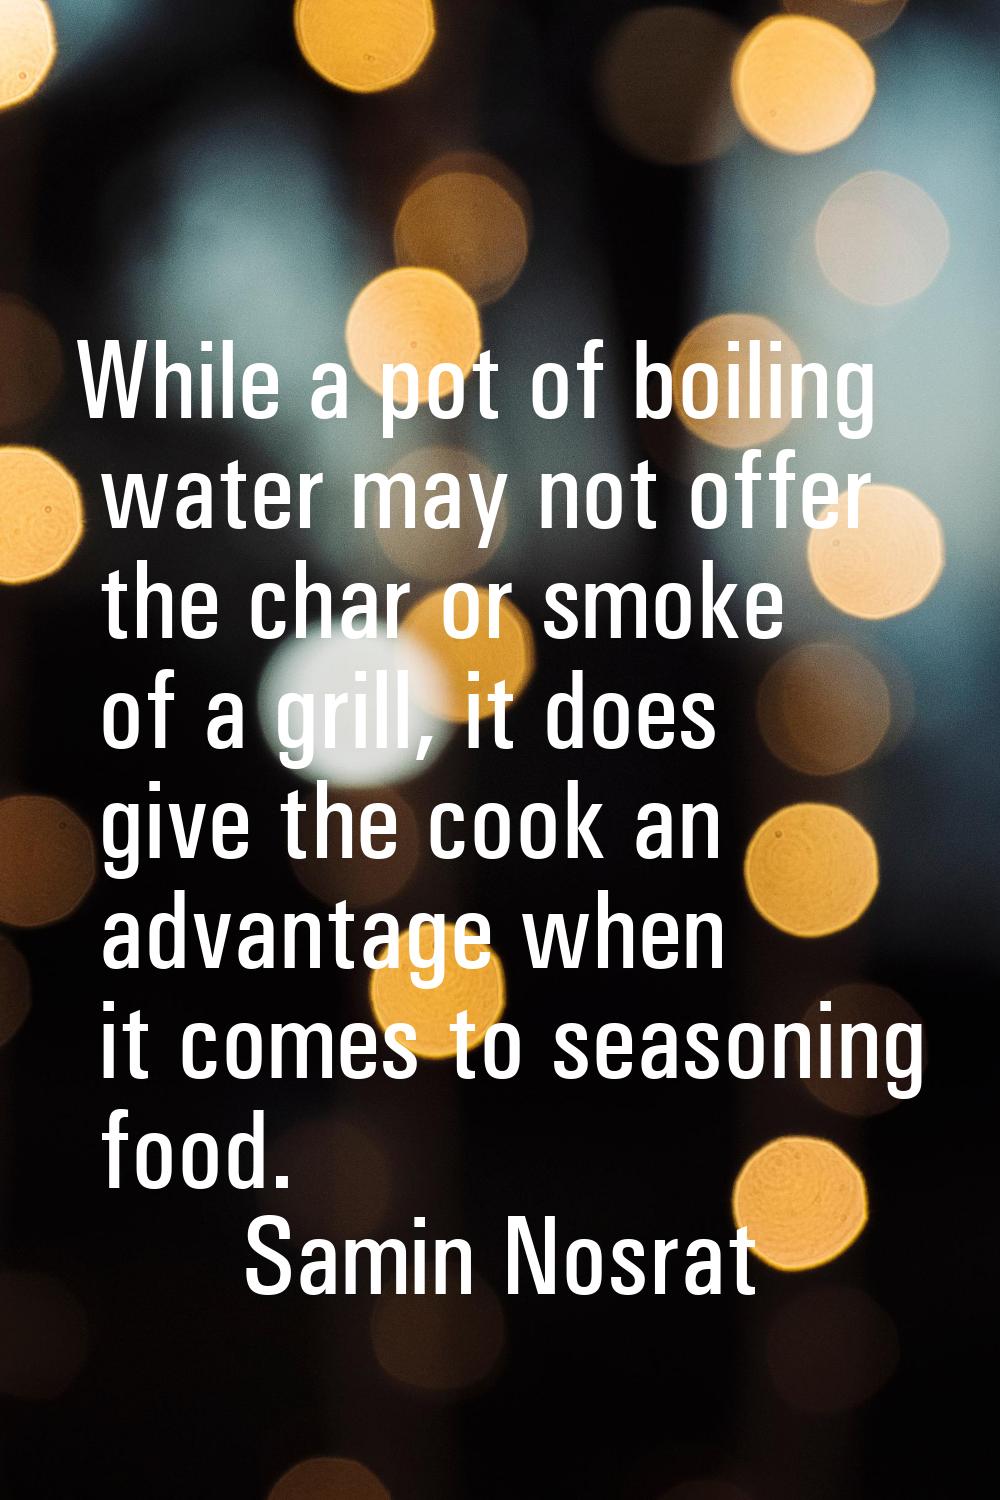 While a pot of boiling water may not offer the char or smoke of a grill, it does give the cook an a